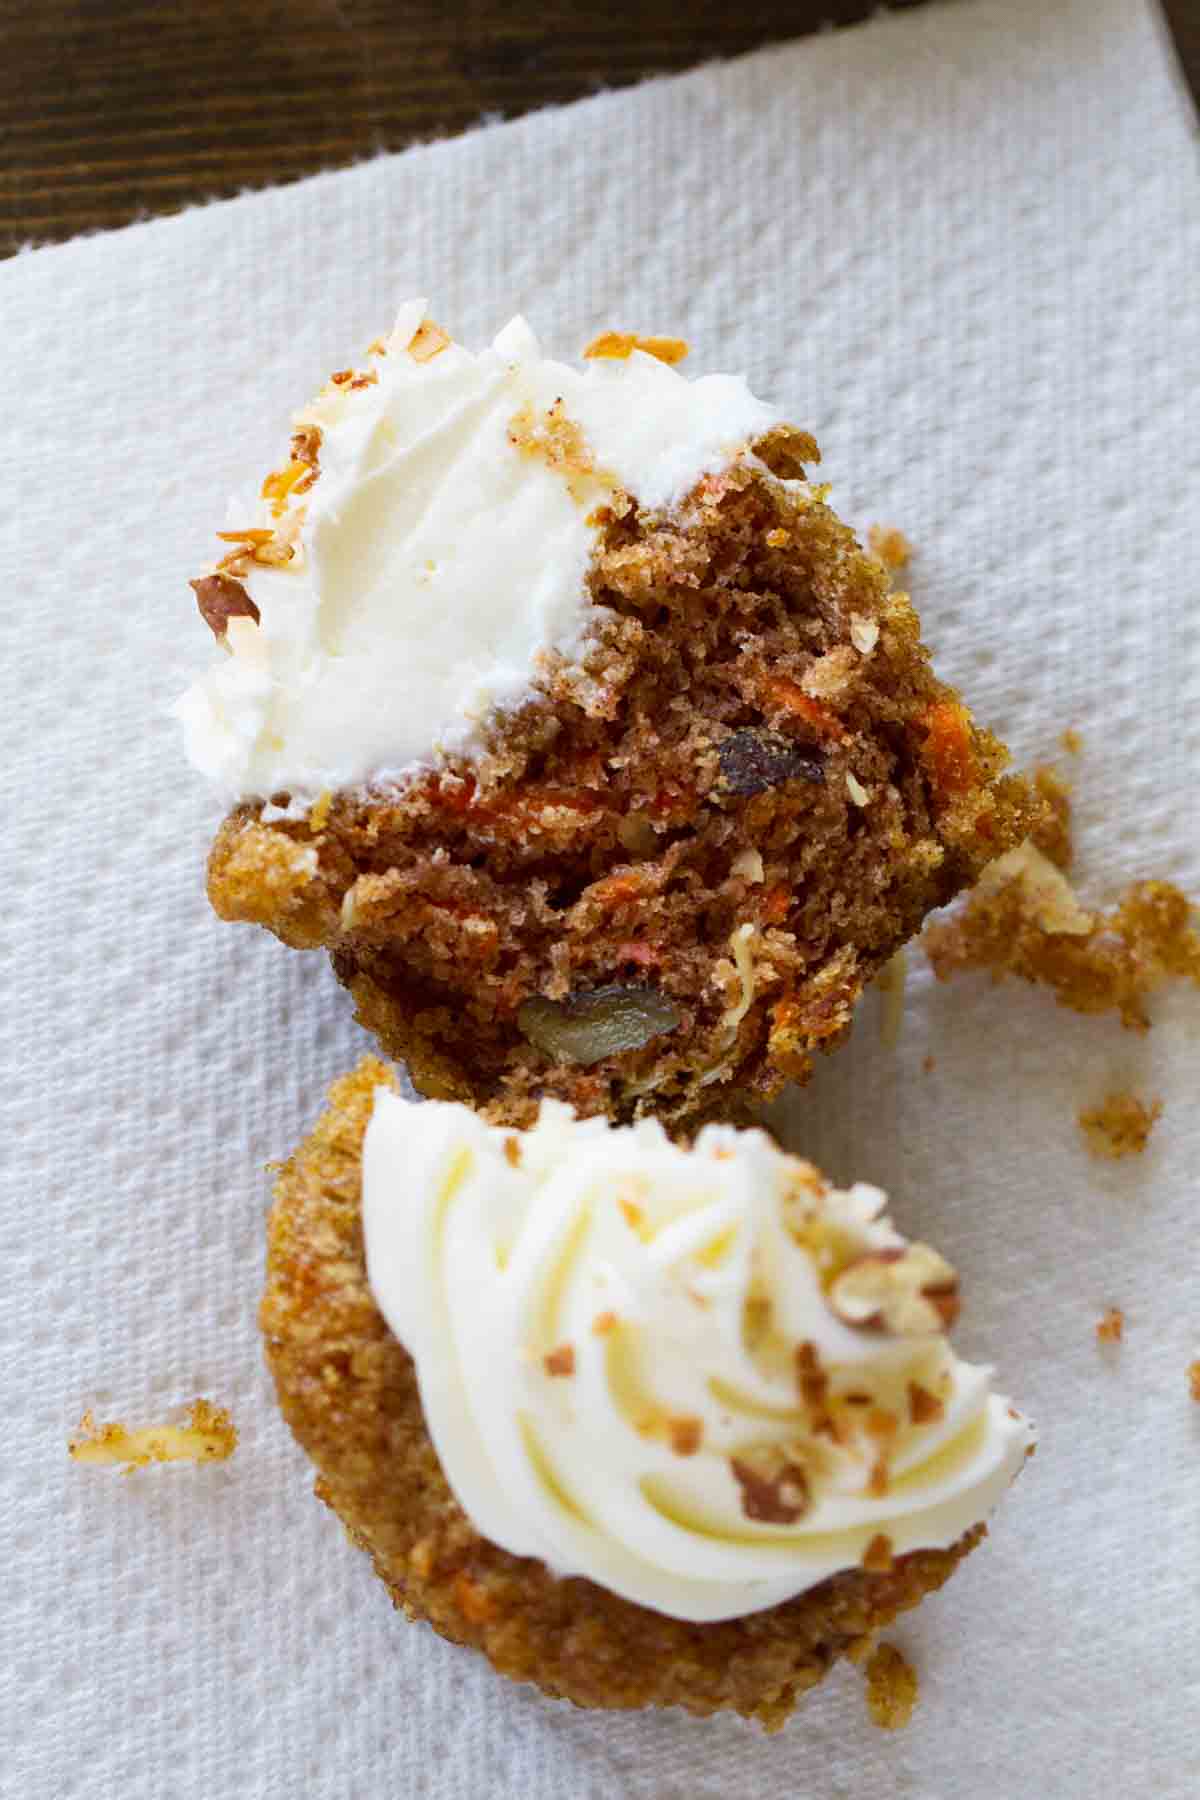 carrot cake cupcake cut in half to show interior